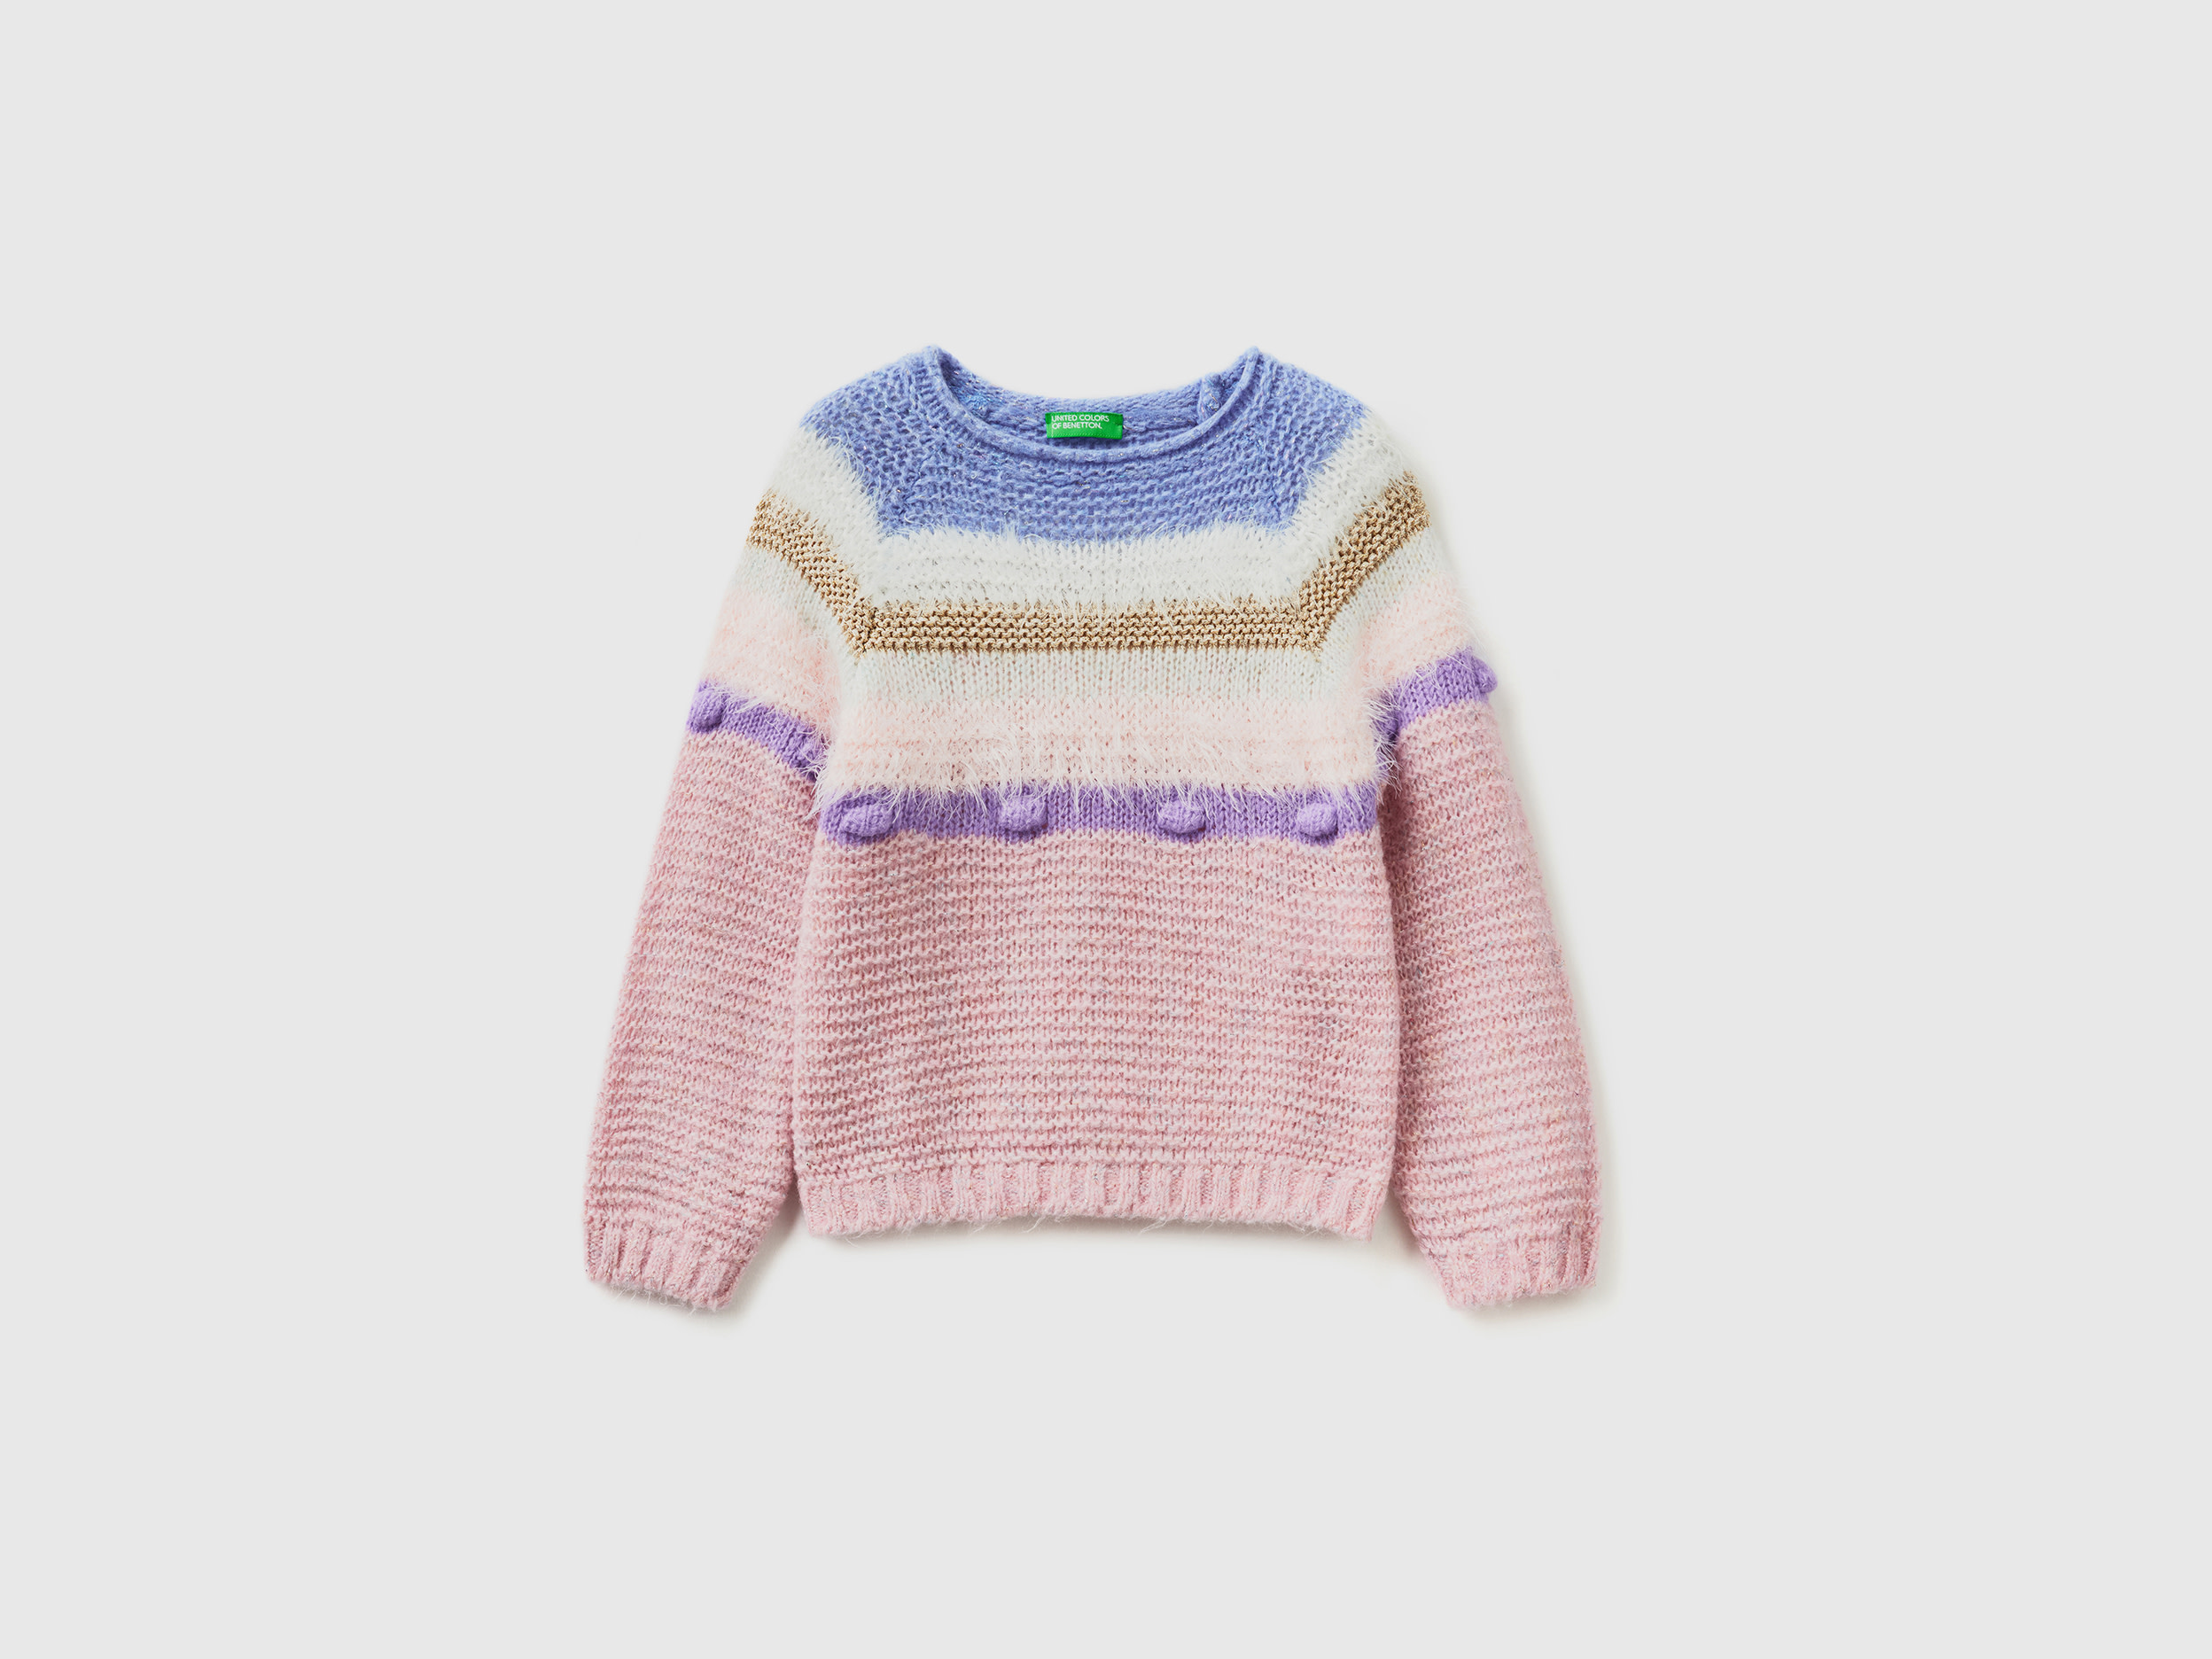 Benetton, Striped Sweater With Lurex, size 12-18, Multi-color, Kids